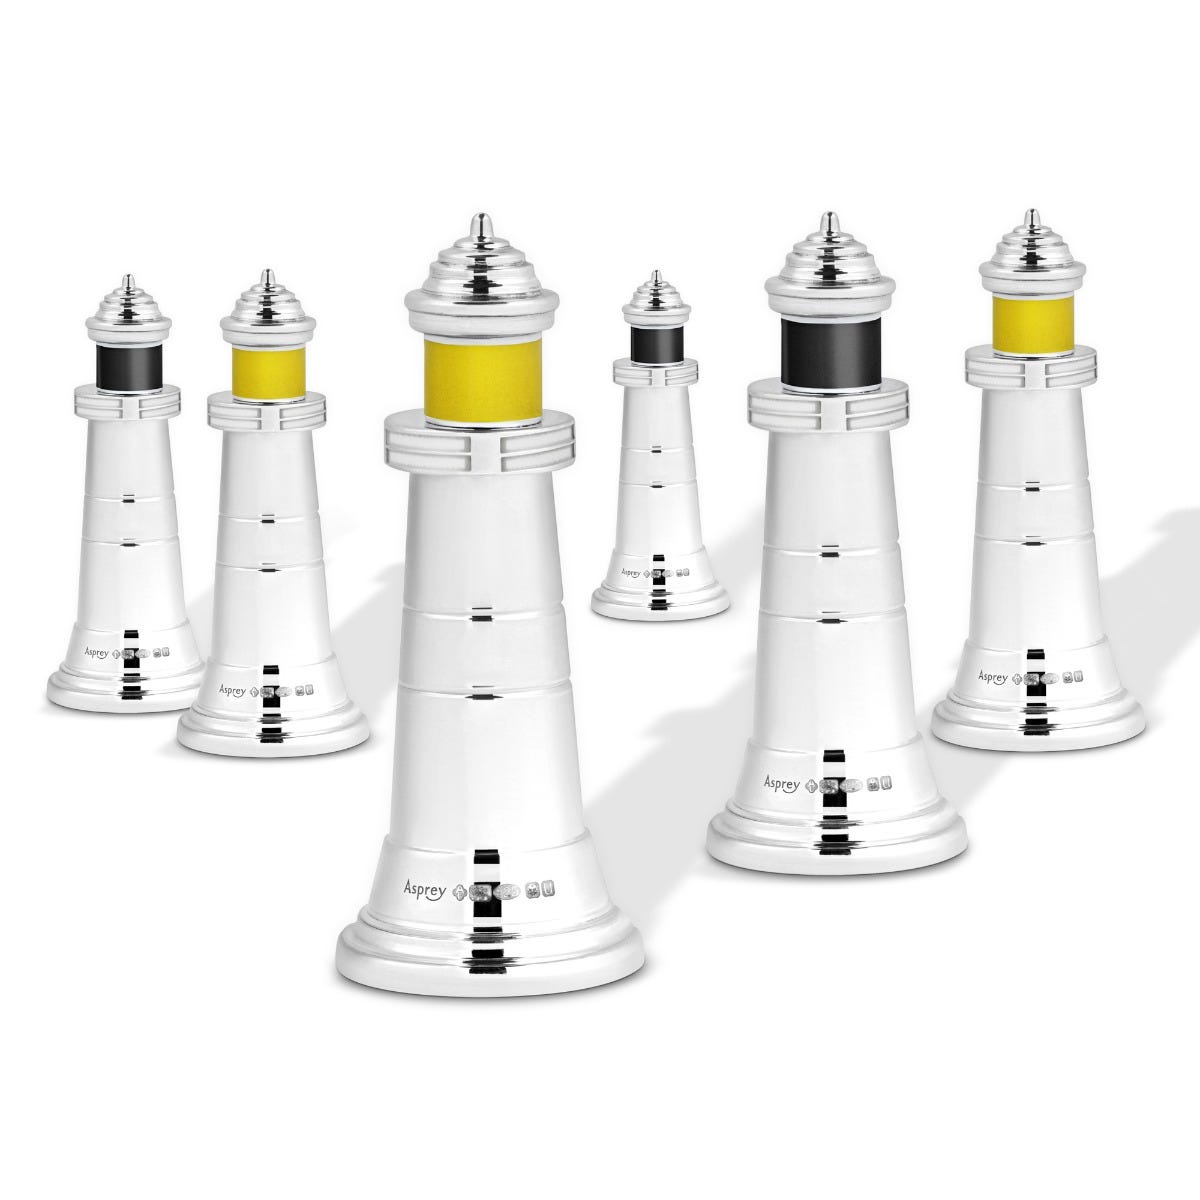 Lighthouse Place Card Holders in Sterling Silver & Enamel, Set of 6